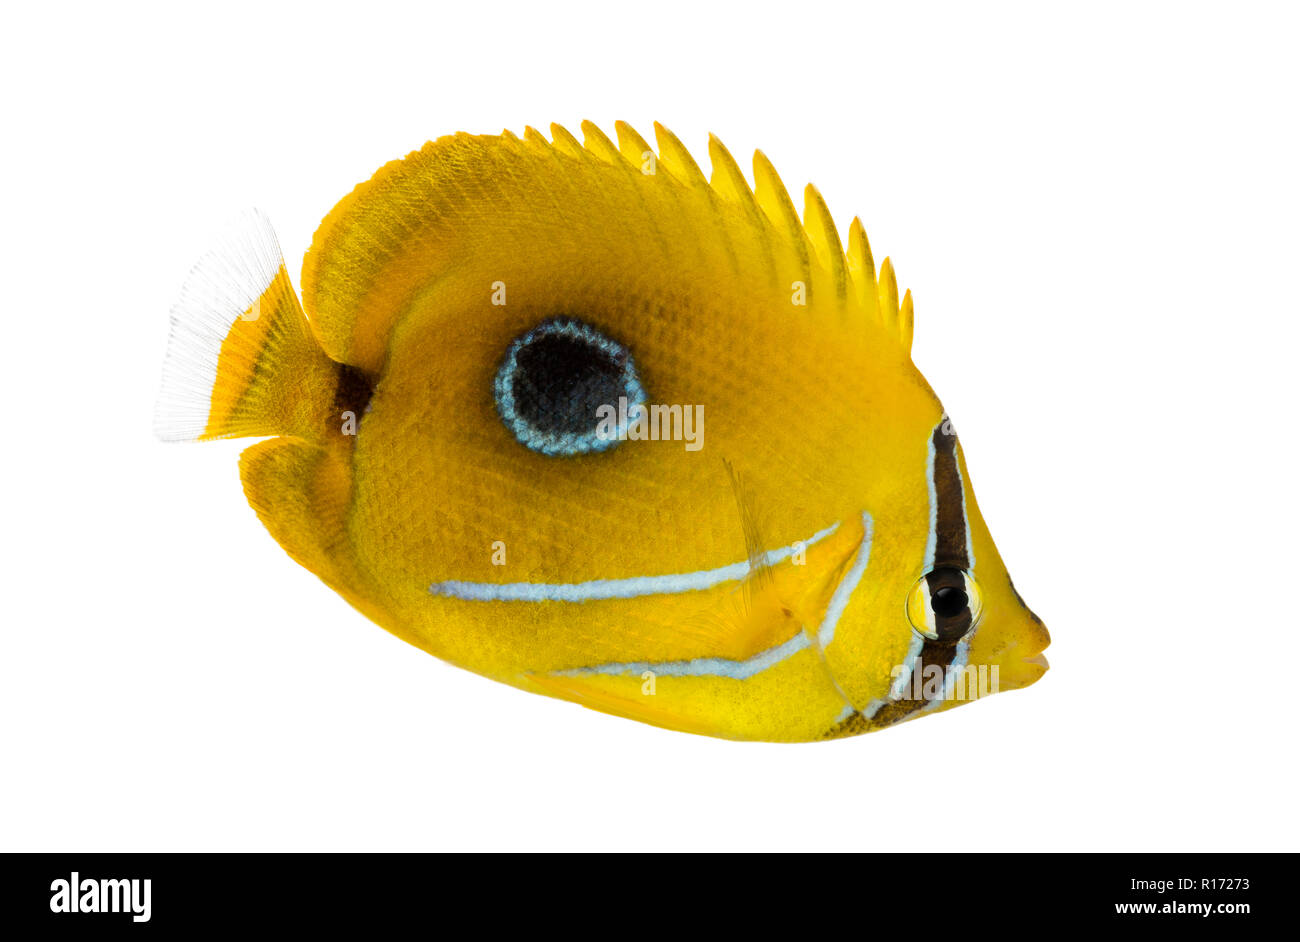 Side view of a Bluelashed butterflyfish, Chaetodon bennetti, isolated on white. Stock Photo